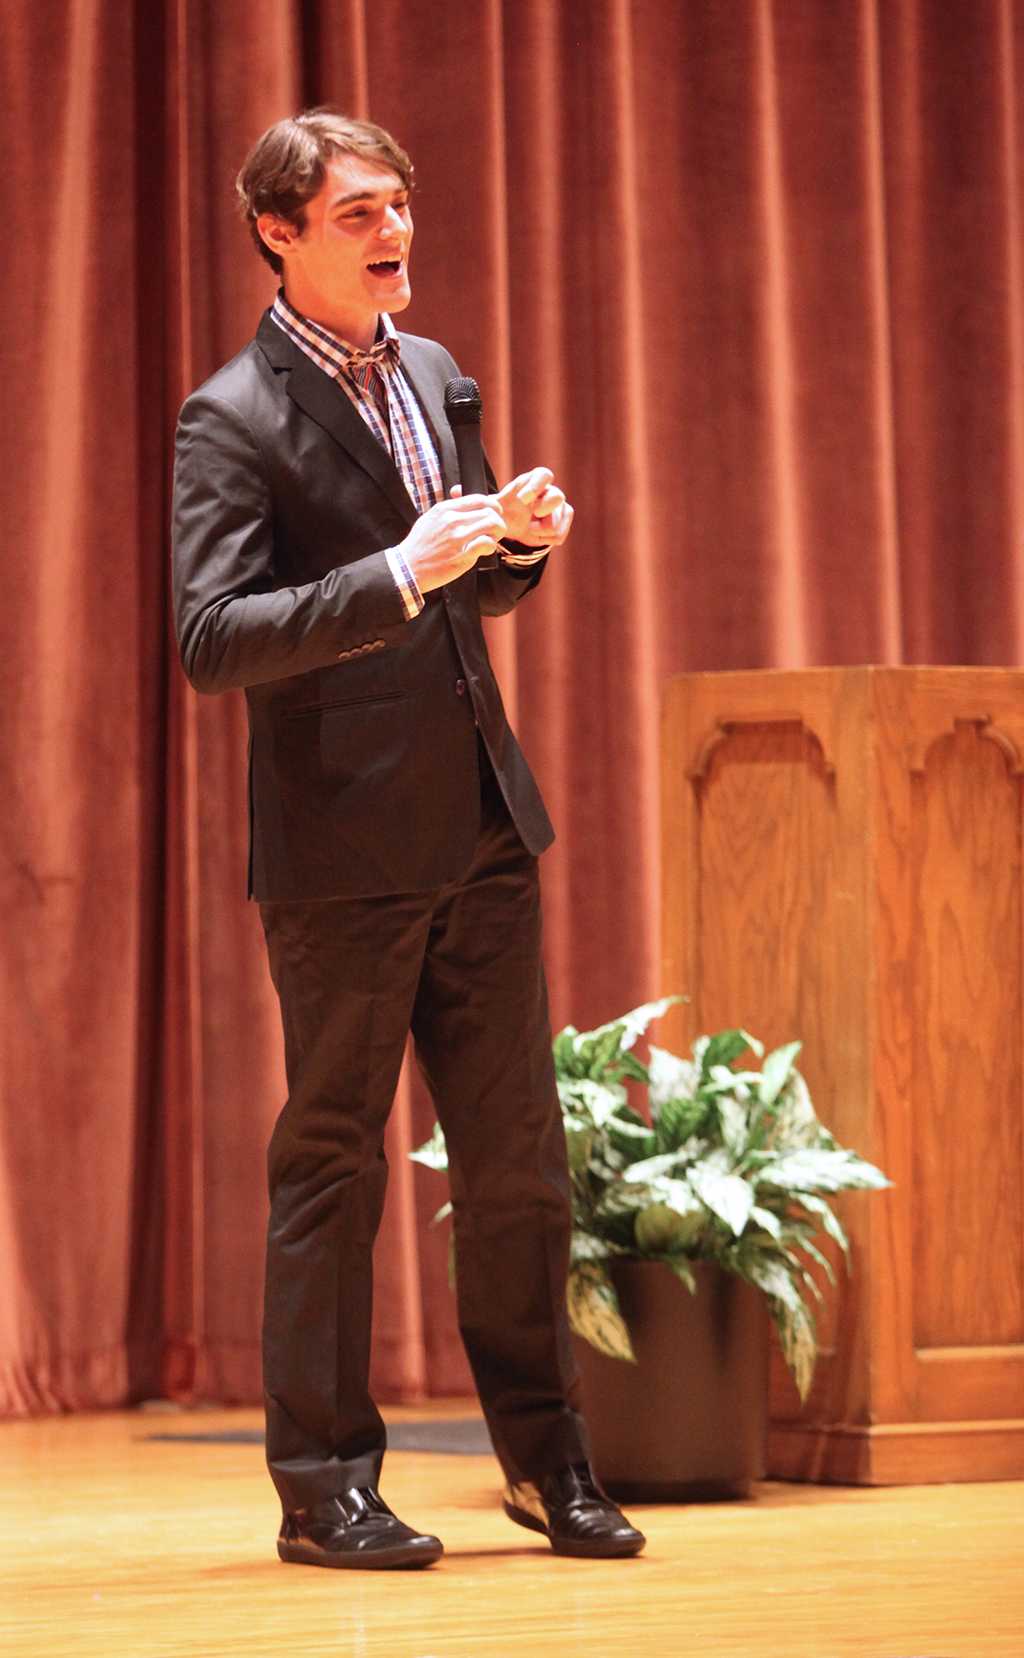 Second artist lecture series held by R.J. Mitte, speaking to students at the Akin Auditorium on the importance of tackling fears, combatting bullying and the stigma behind disabilities. Oct 18, 2016. Photography by Bridget Reilly